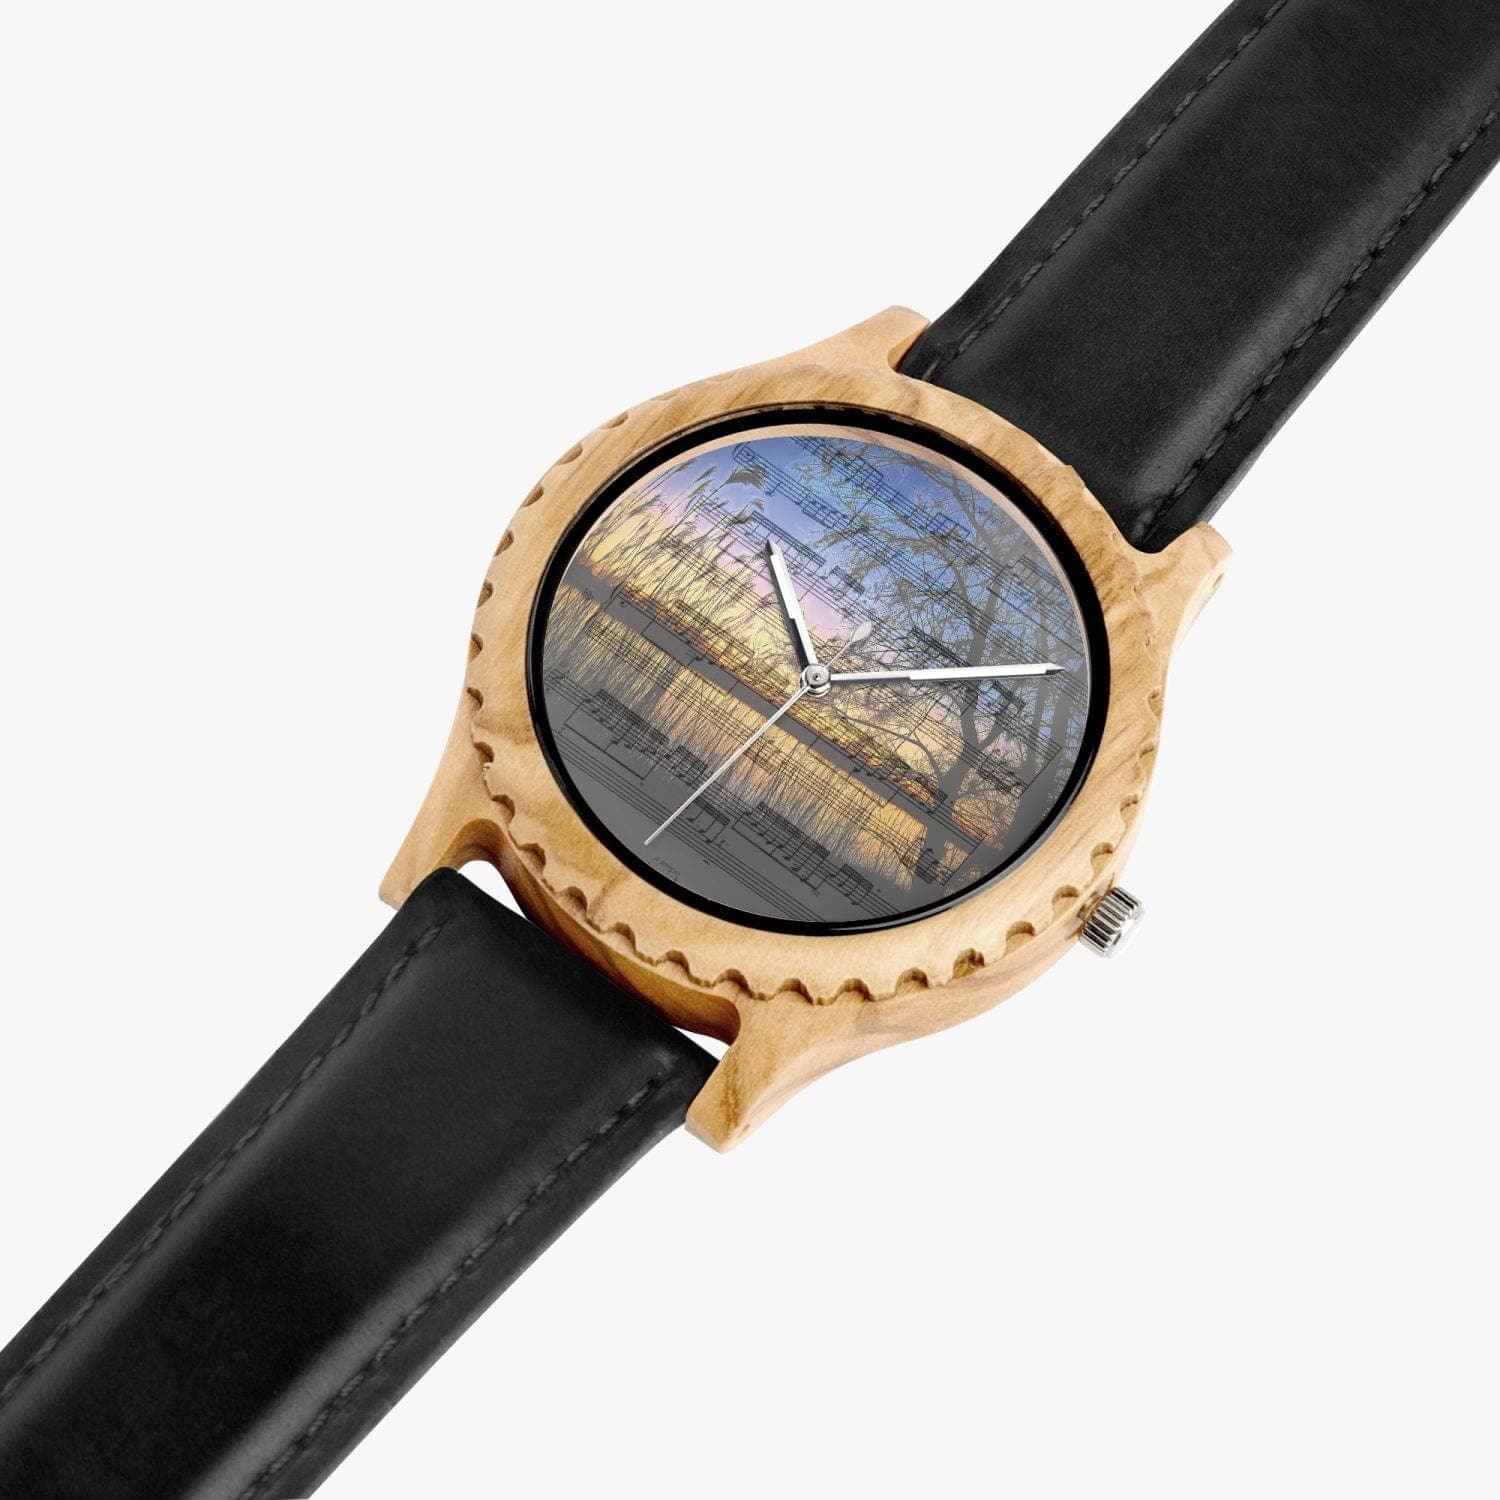 Tango in the dawn. Italian Olive Lumber Wooden Watch - Leather Strap. Designer watch by Sensus Studio Design